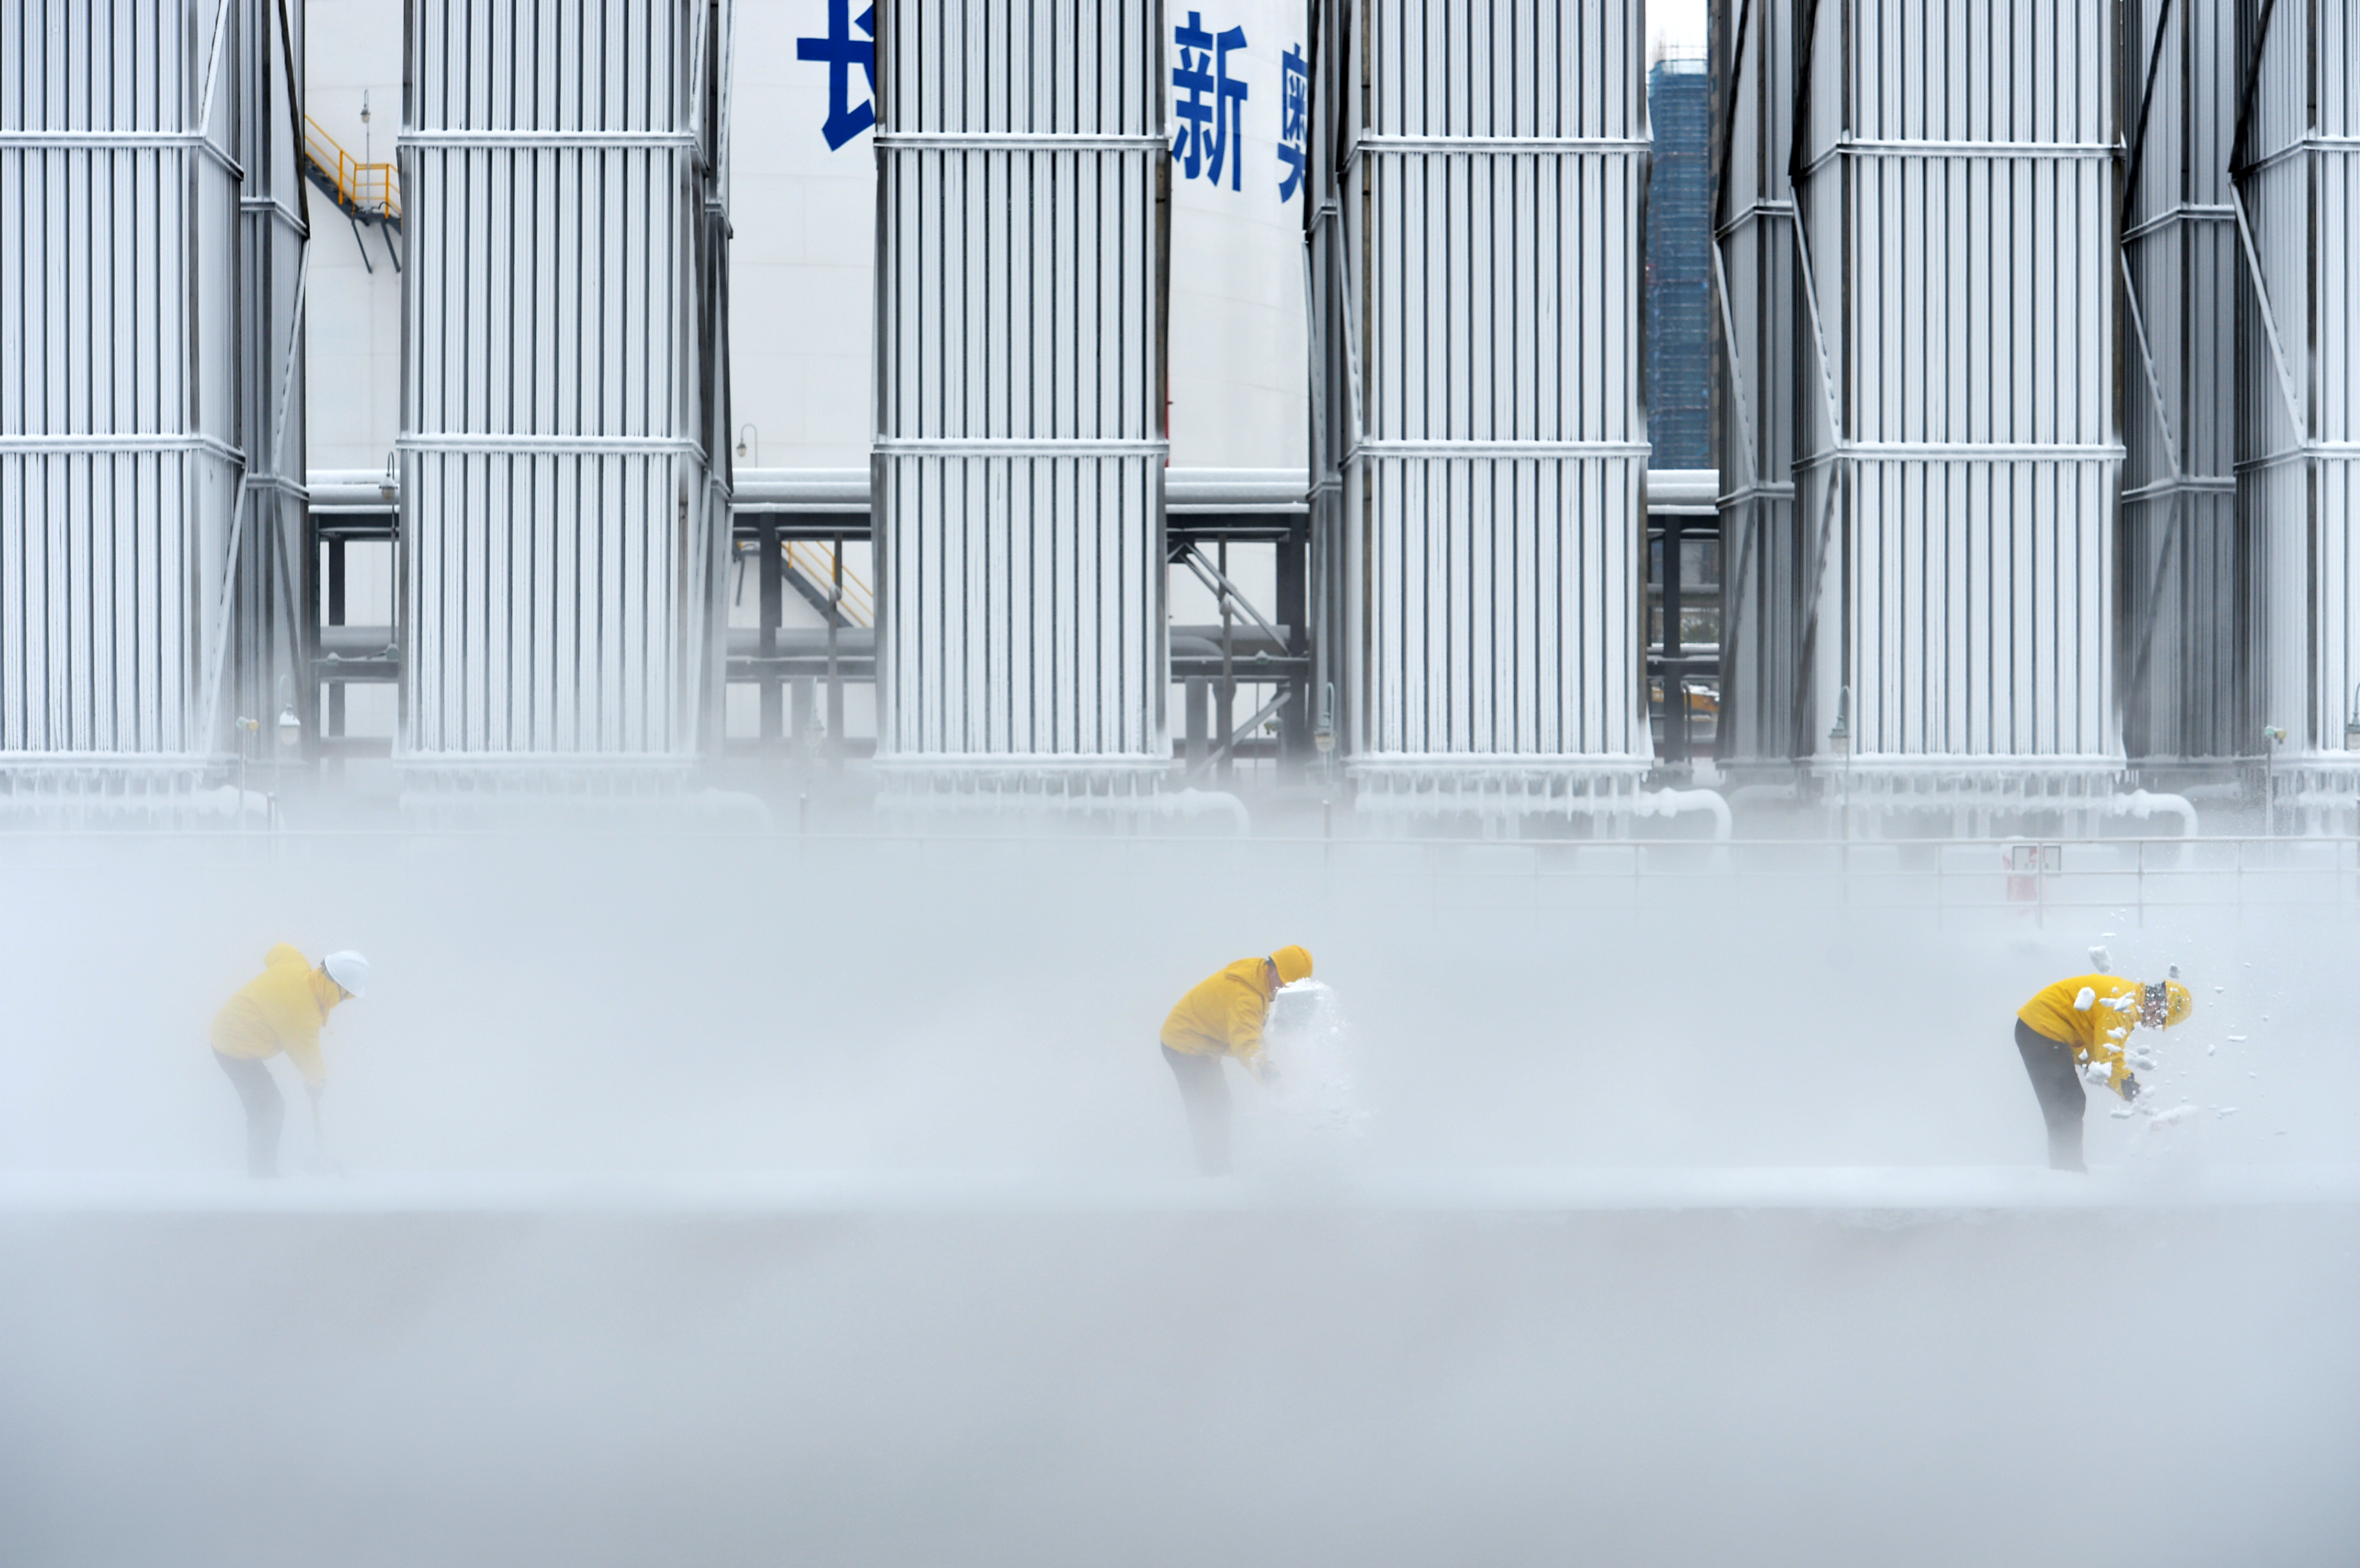 Workers remove snow at a liquefied natural gas (LNG) facility of ENN Group in Changsha, Hunan province, China December 31, 2018.  REUTERS/Stringer